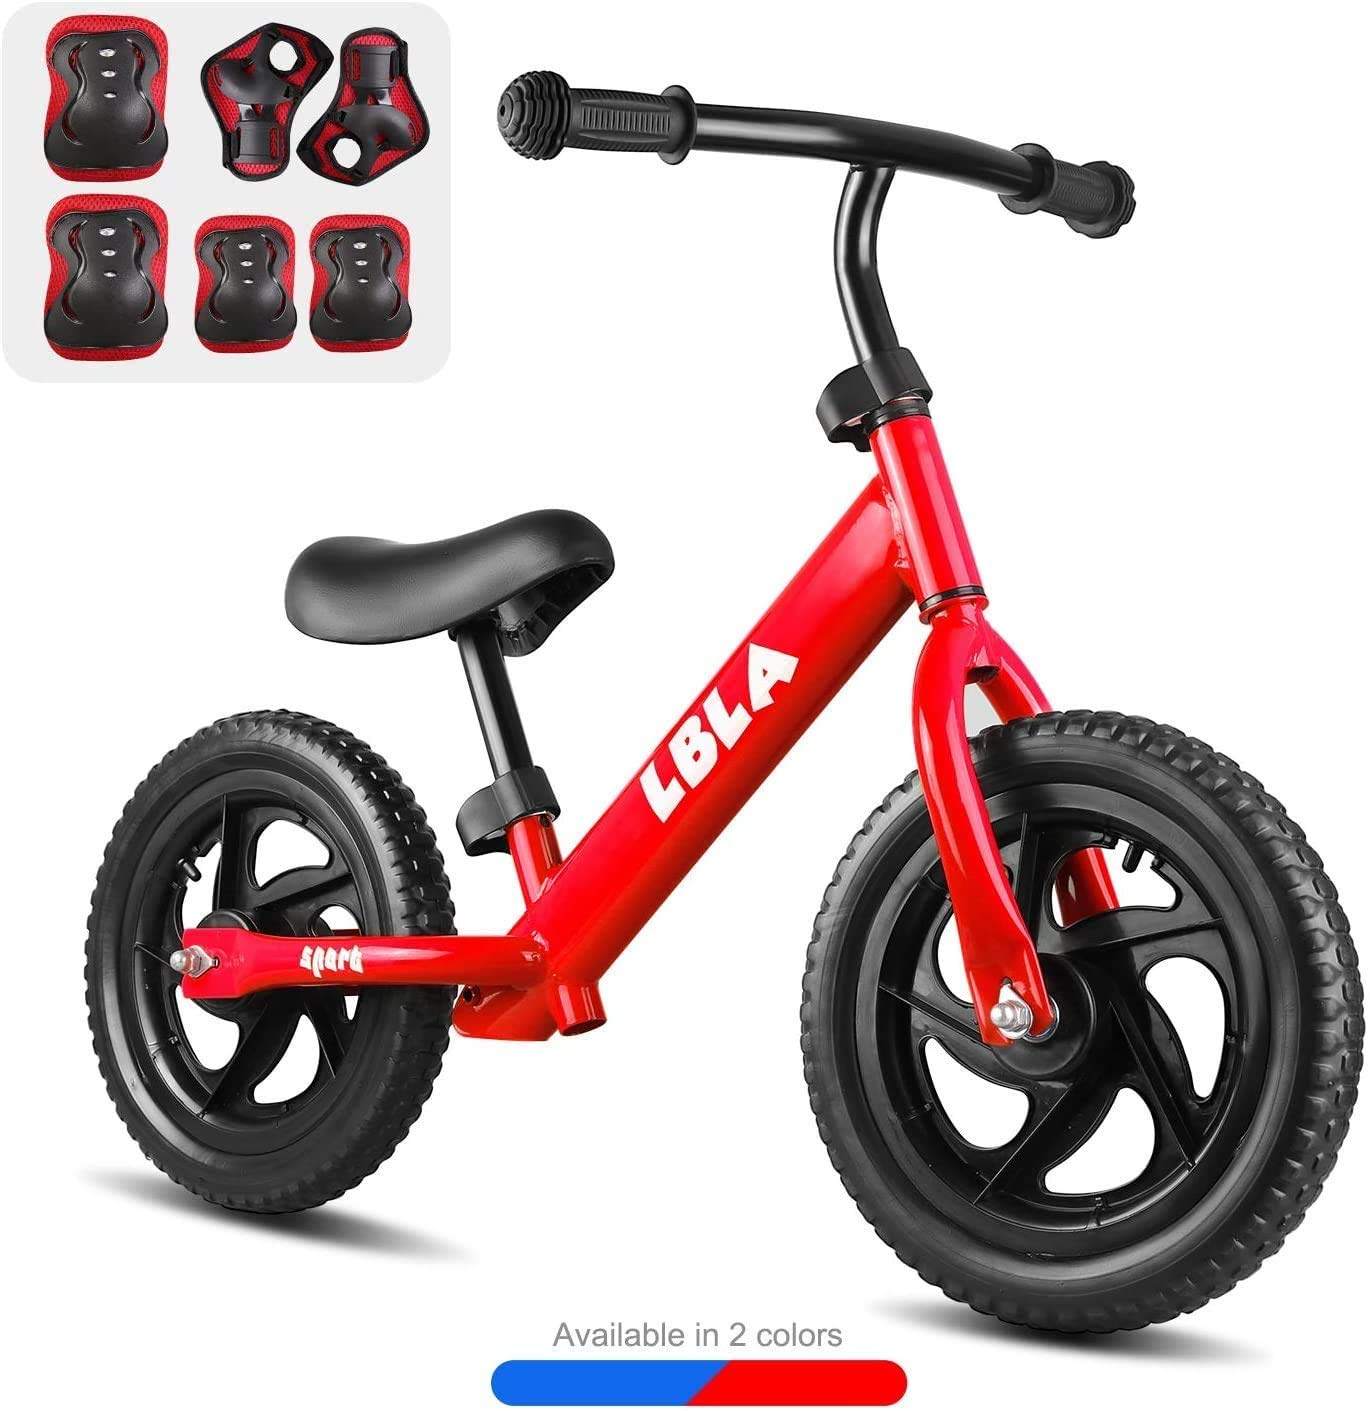 Best Price on Kids Riding Scooters - BeebeeRun Kids 12” Classic Sport Balance Bike with Protective Gear, Age 2 to 6 Year Old Boys Girls, No Pedal Sport Training Bicycle – Ealing